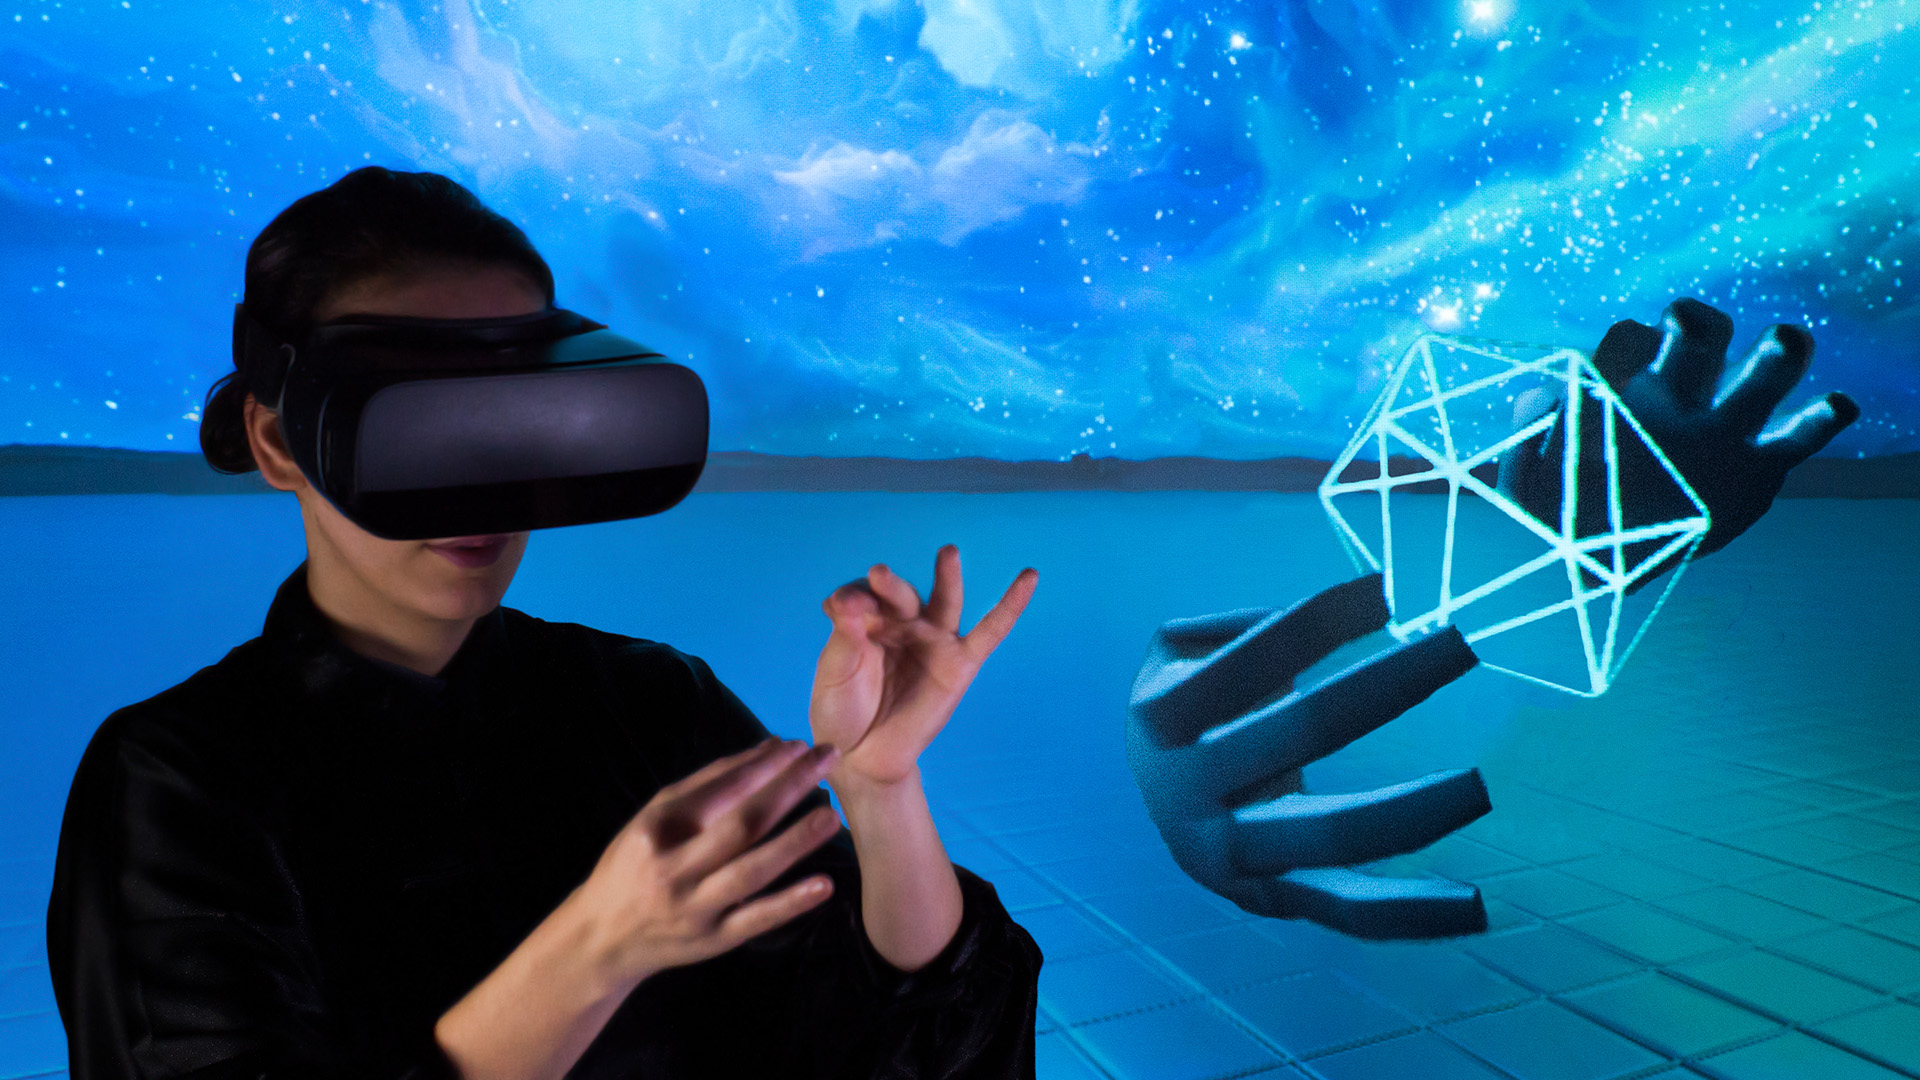 Leap Motion to develop hand tracking sensor for smartphone VR - NotebookCheck.net